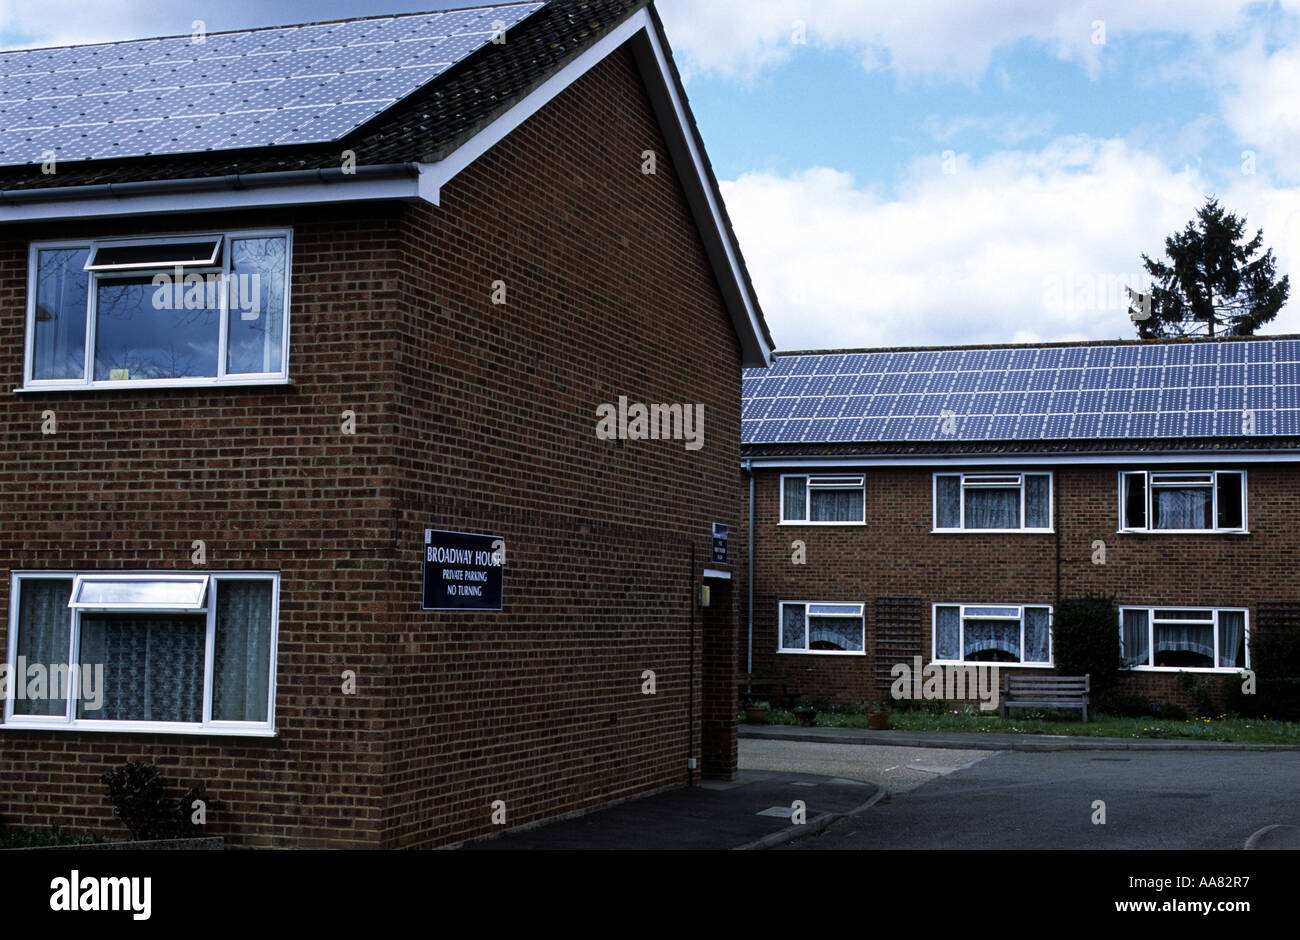 Photovoltaic panels producing solar energy to Broadway House, a sheltered housing complex, Knaphill, Woking, Surrey, UK. Stock Photo